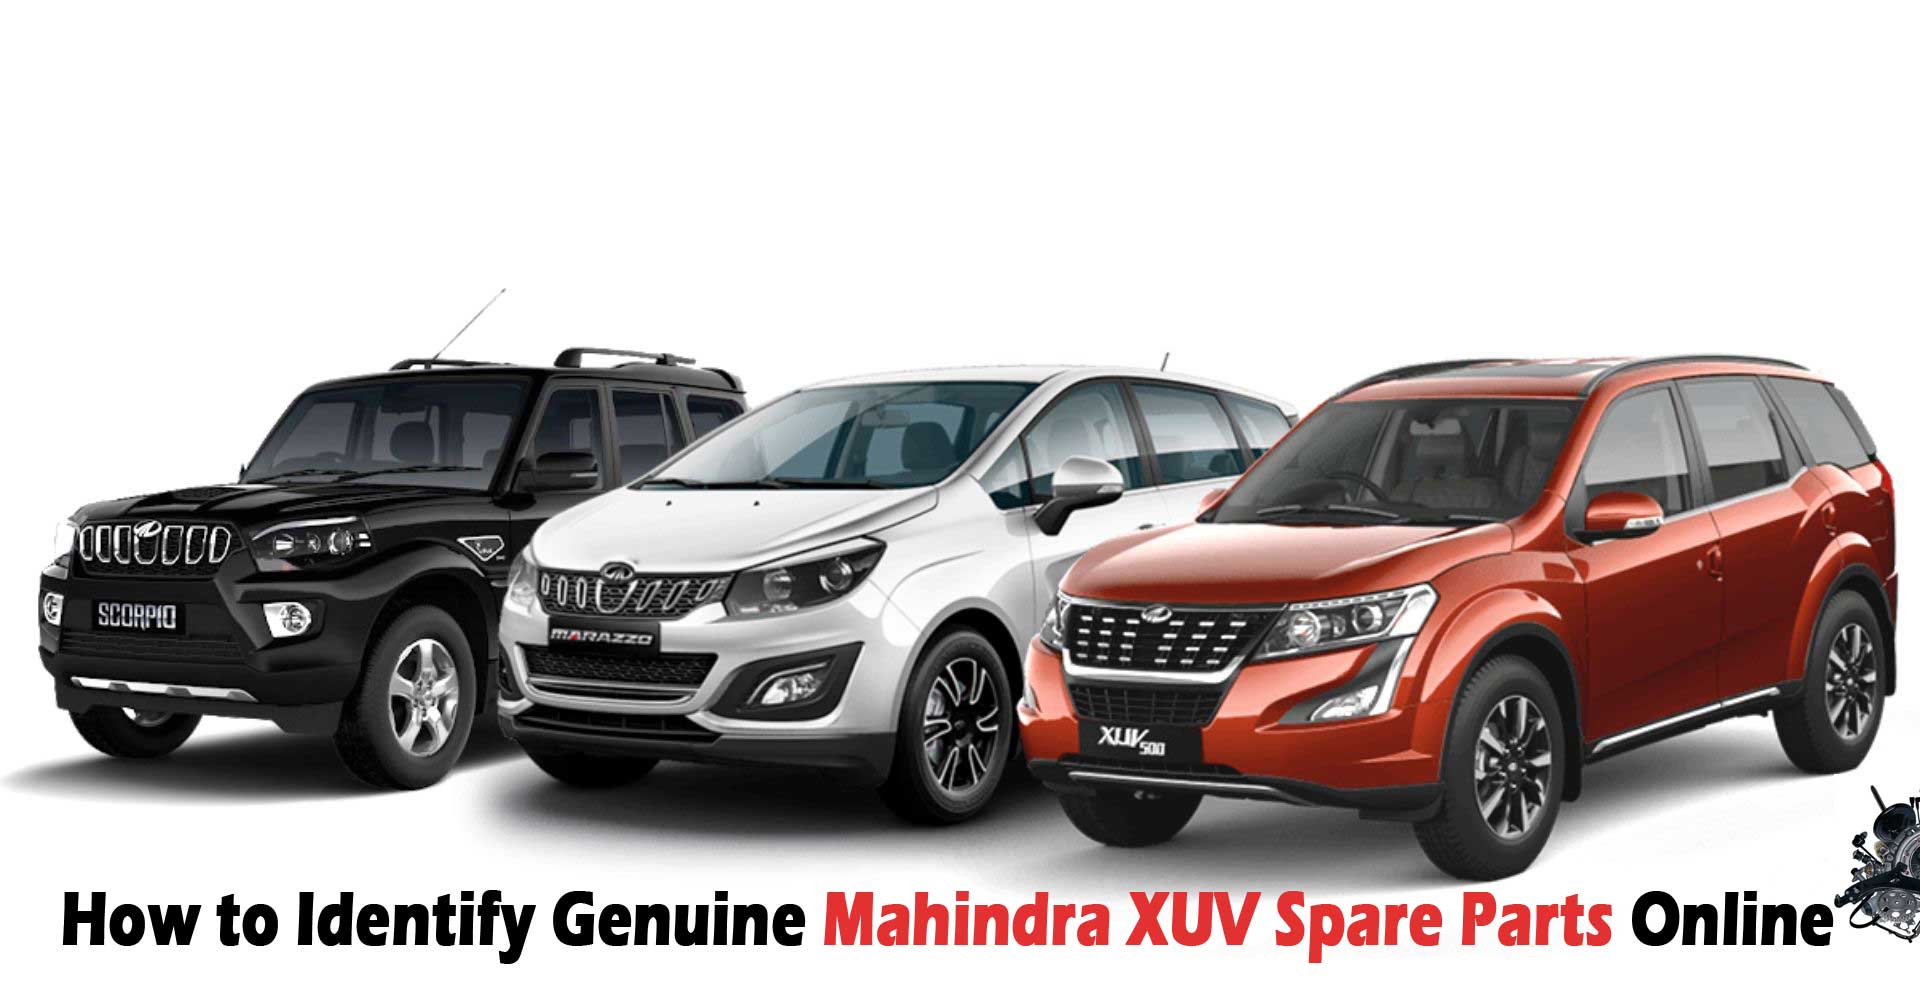 How to Identify Genuine Mahindra XUV Spare Parts Online